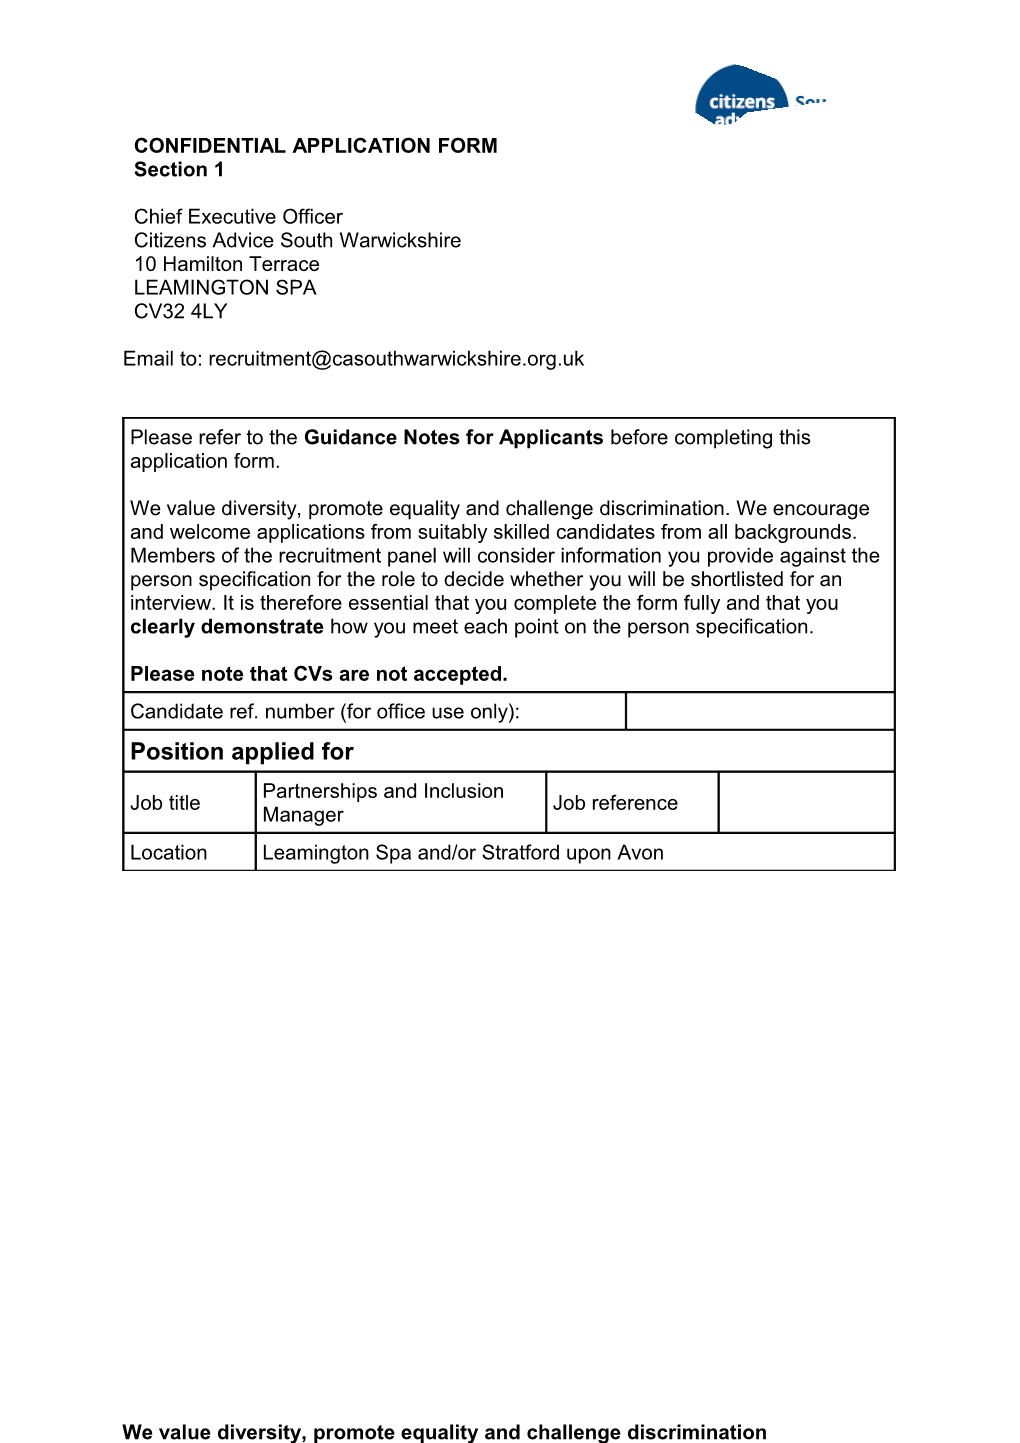 Paid Staff Model Application Form s1